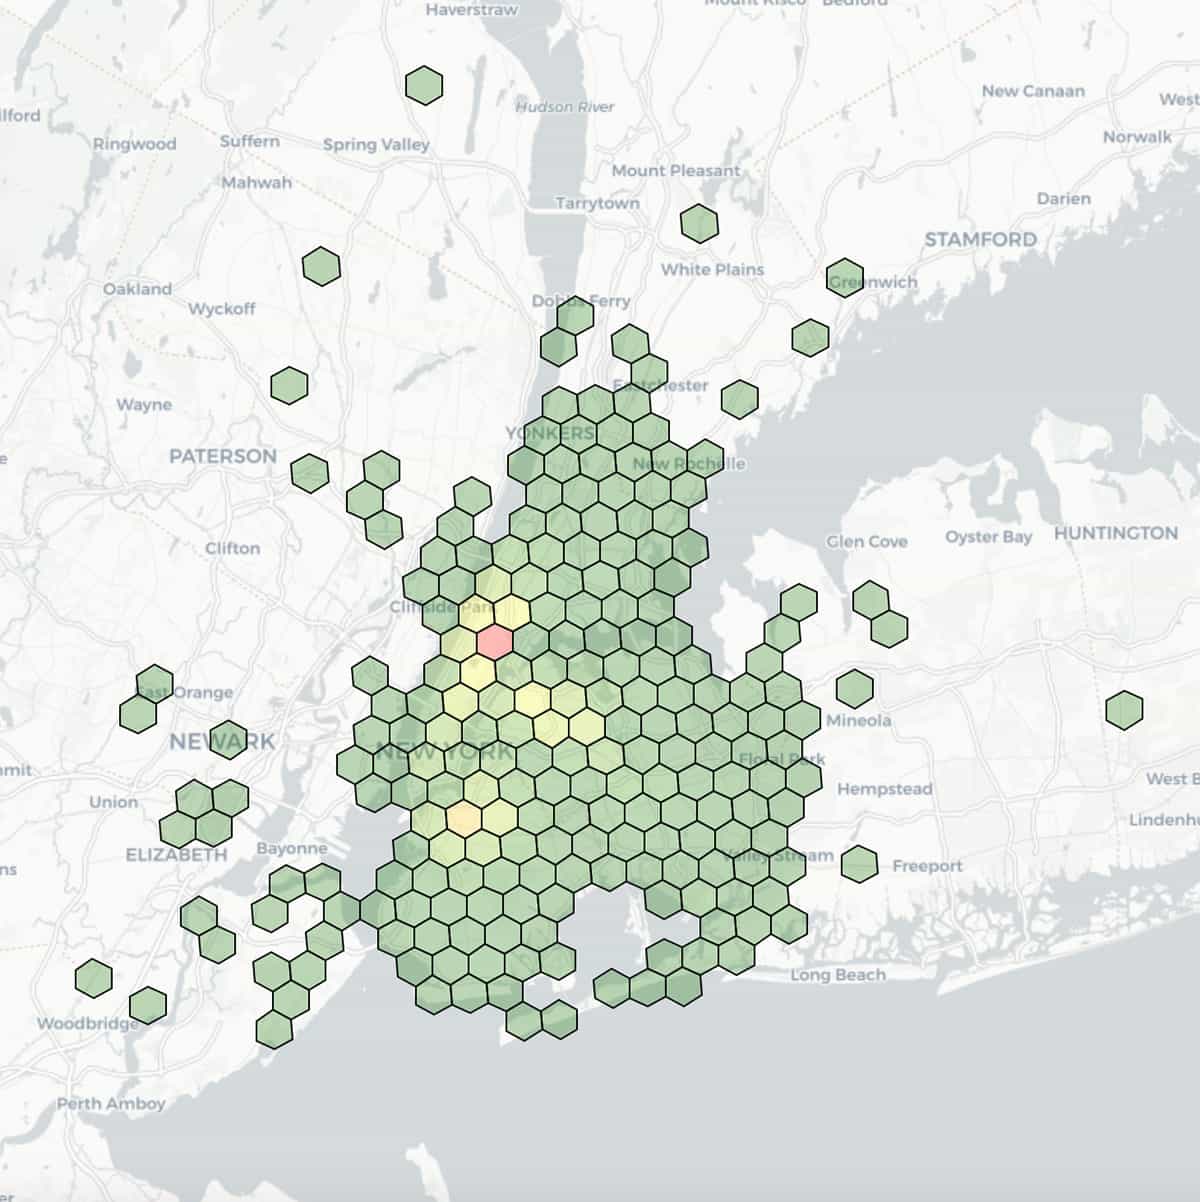 Geospatial visualization of taxi dropoff locations, with latitude and longitude binned at a resolution of 7 (1.22km edge length) and colored by aggregated counts within each bin.